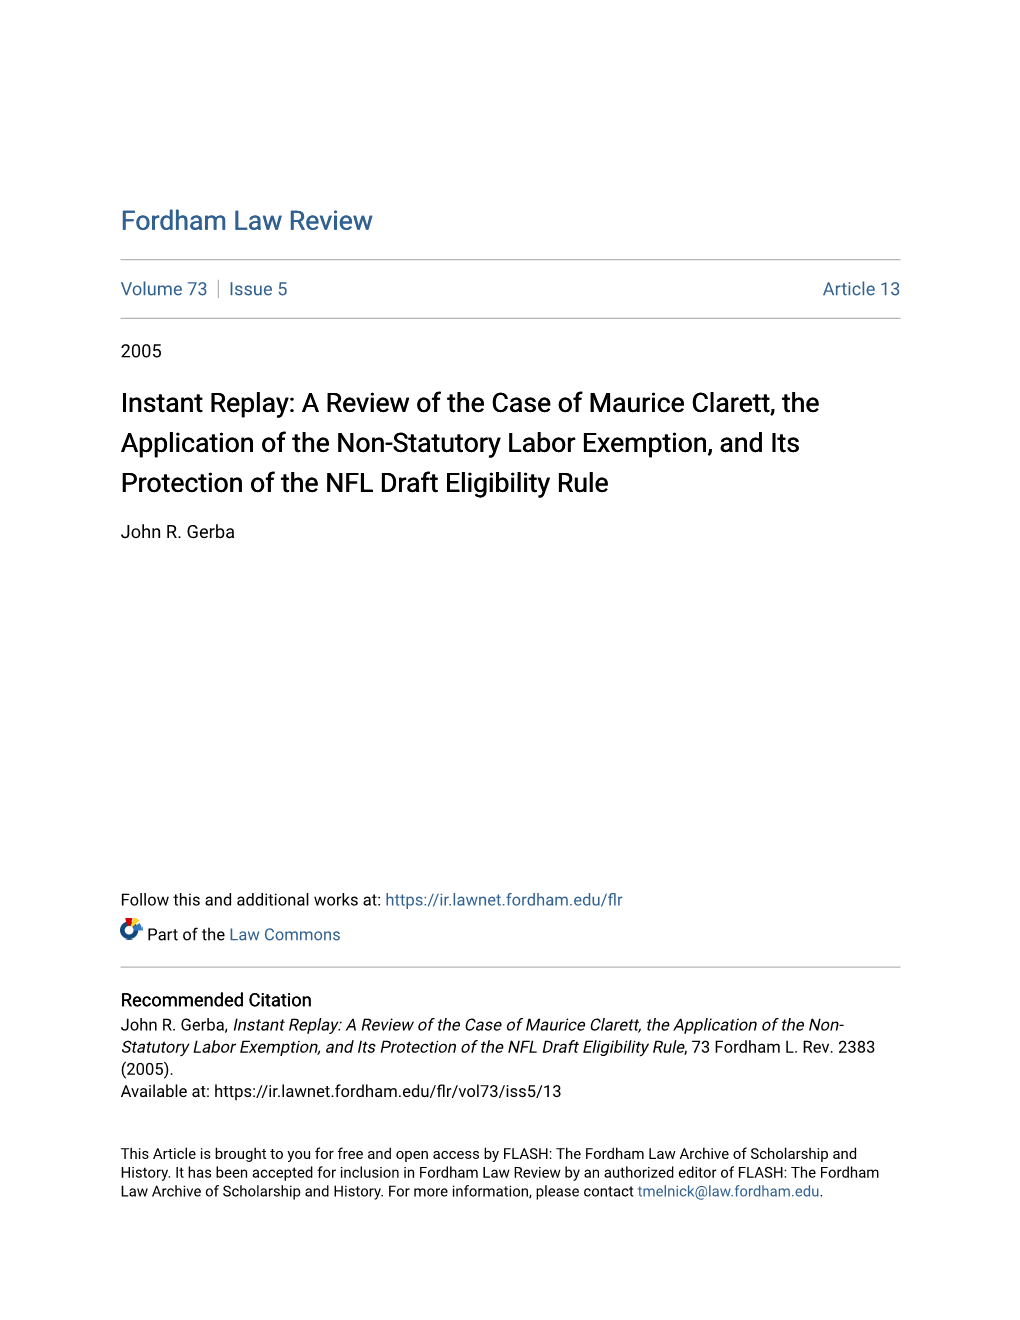 Instant Replay: a Review of the Case of Maurice Clarett, the Application of the Non-Statutory Labor Exemption, and Its Protection of the NFL Draft Eligibility Rule